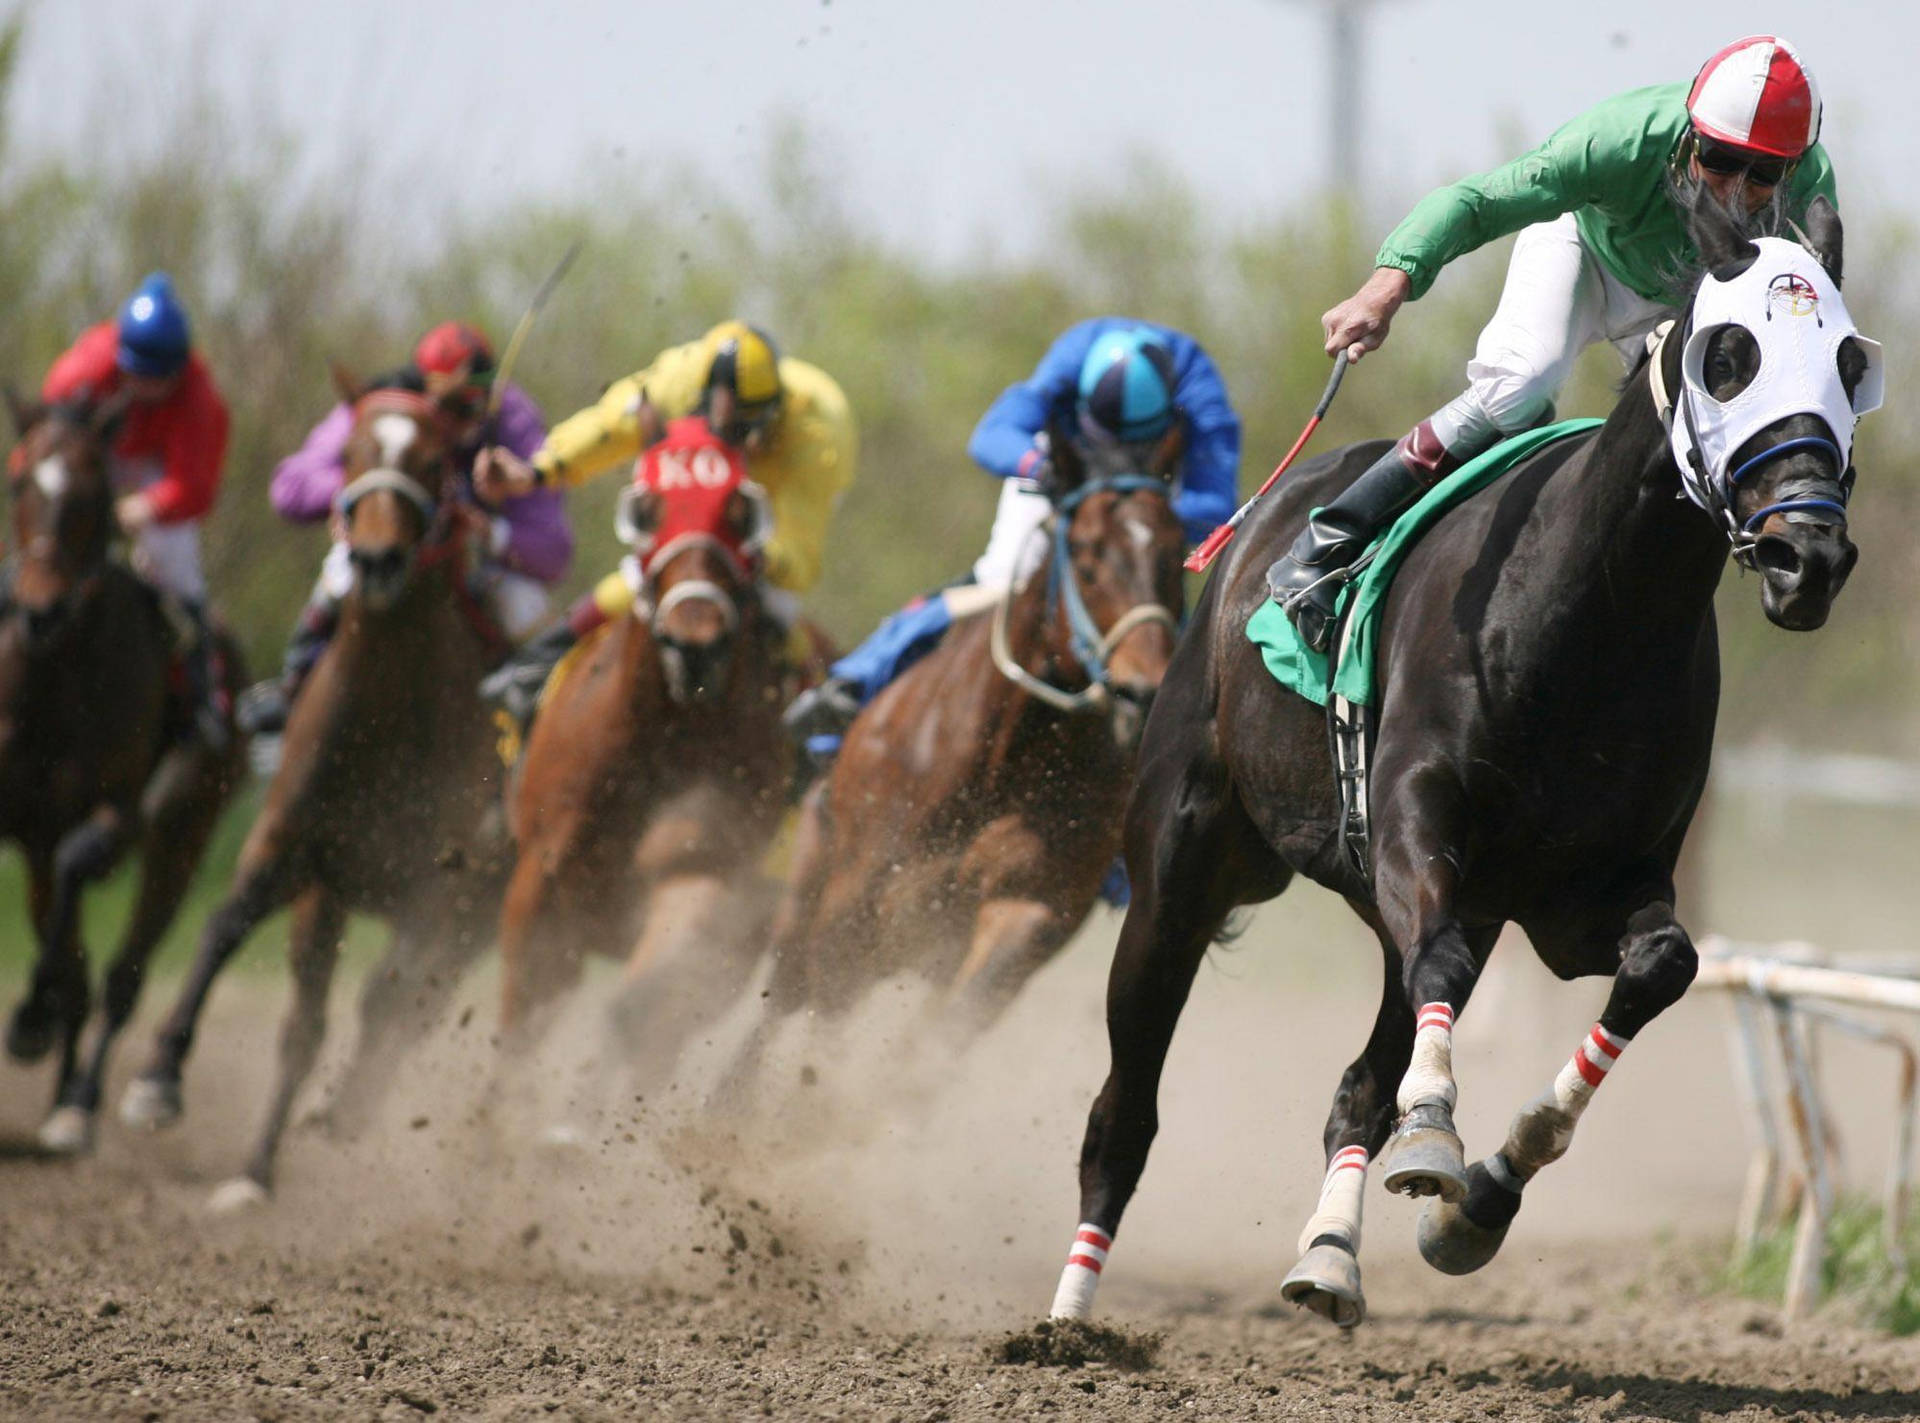 Masked Horses In A Horse Racing Background